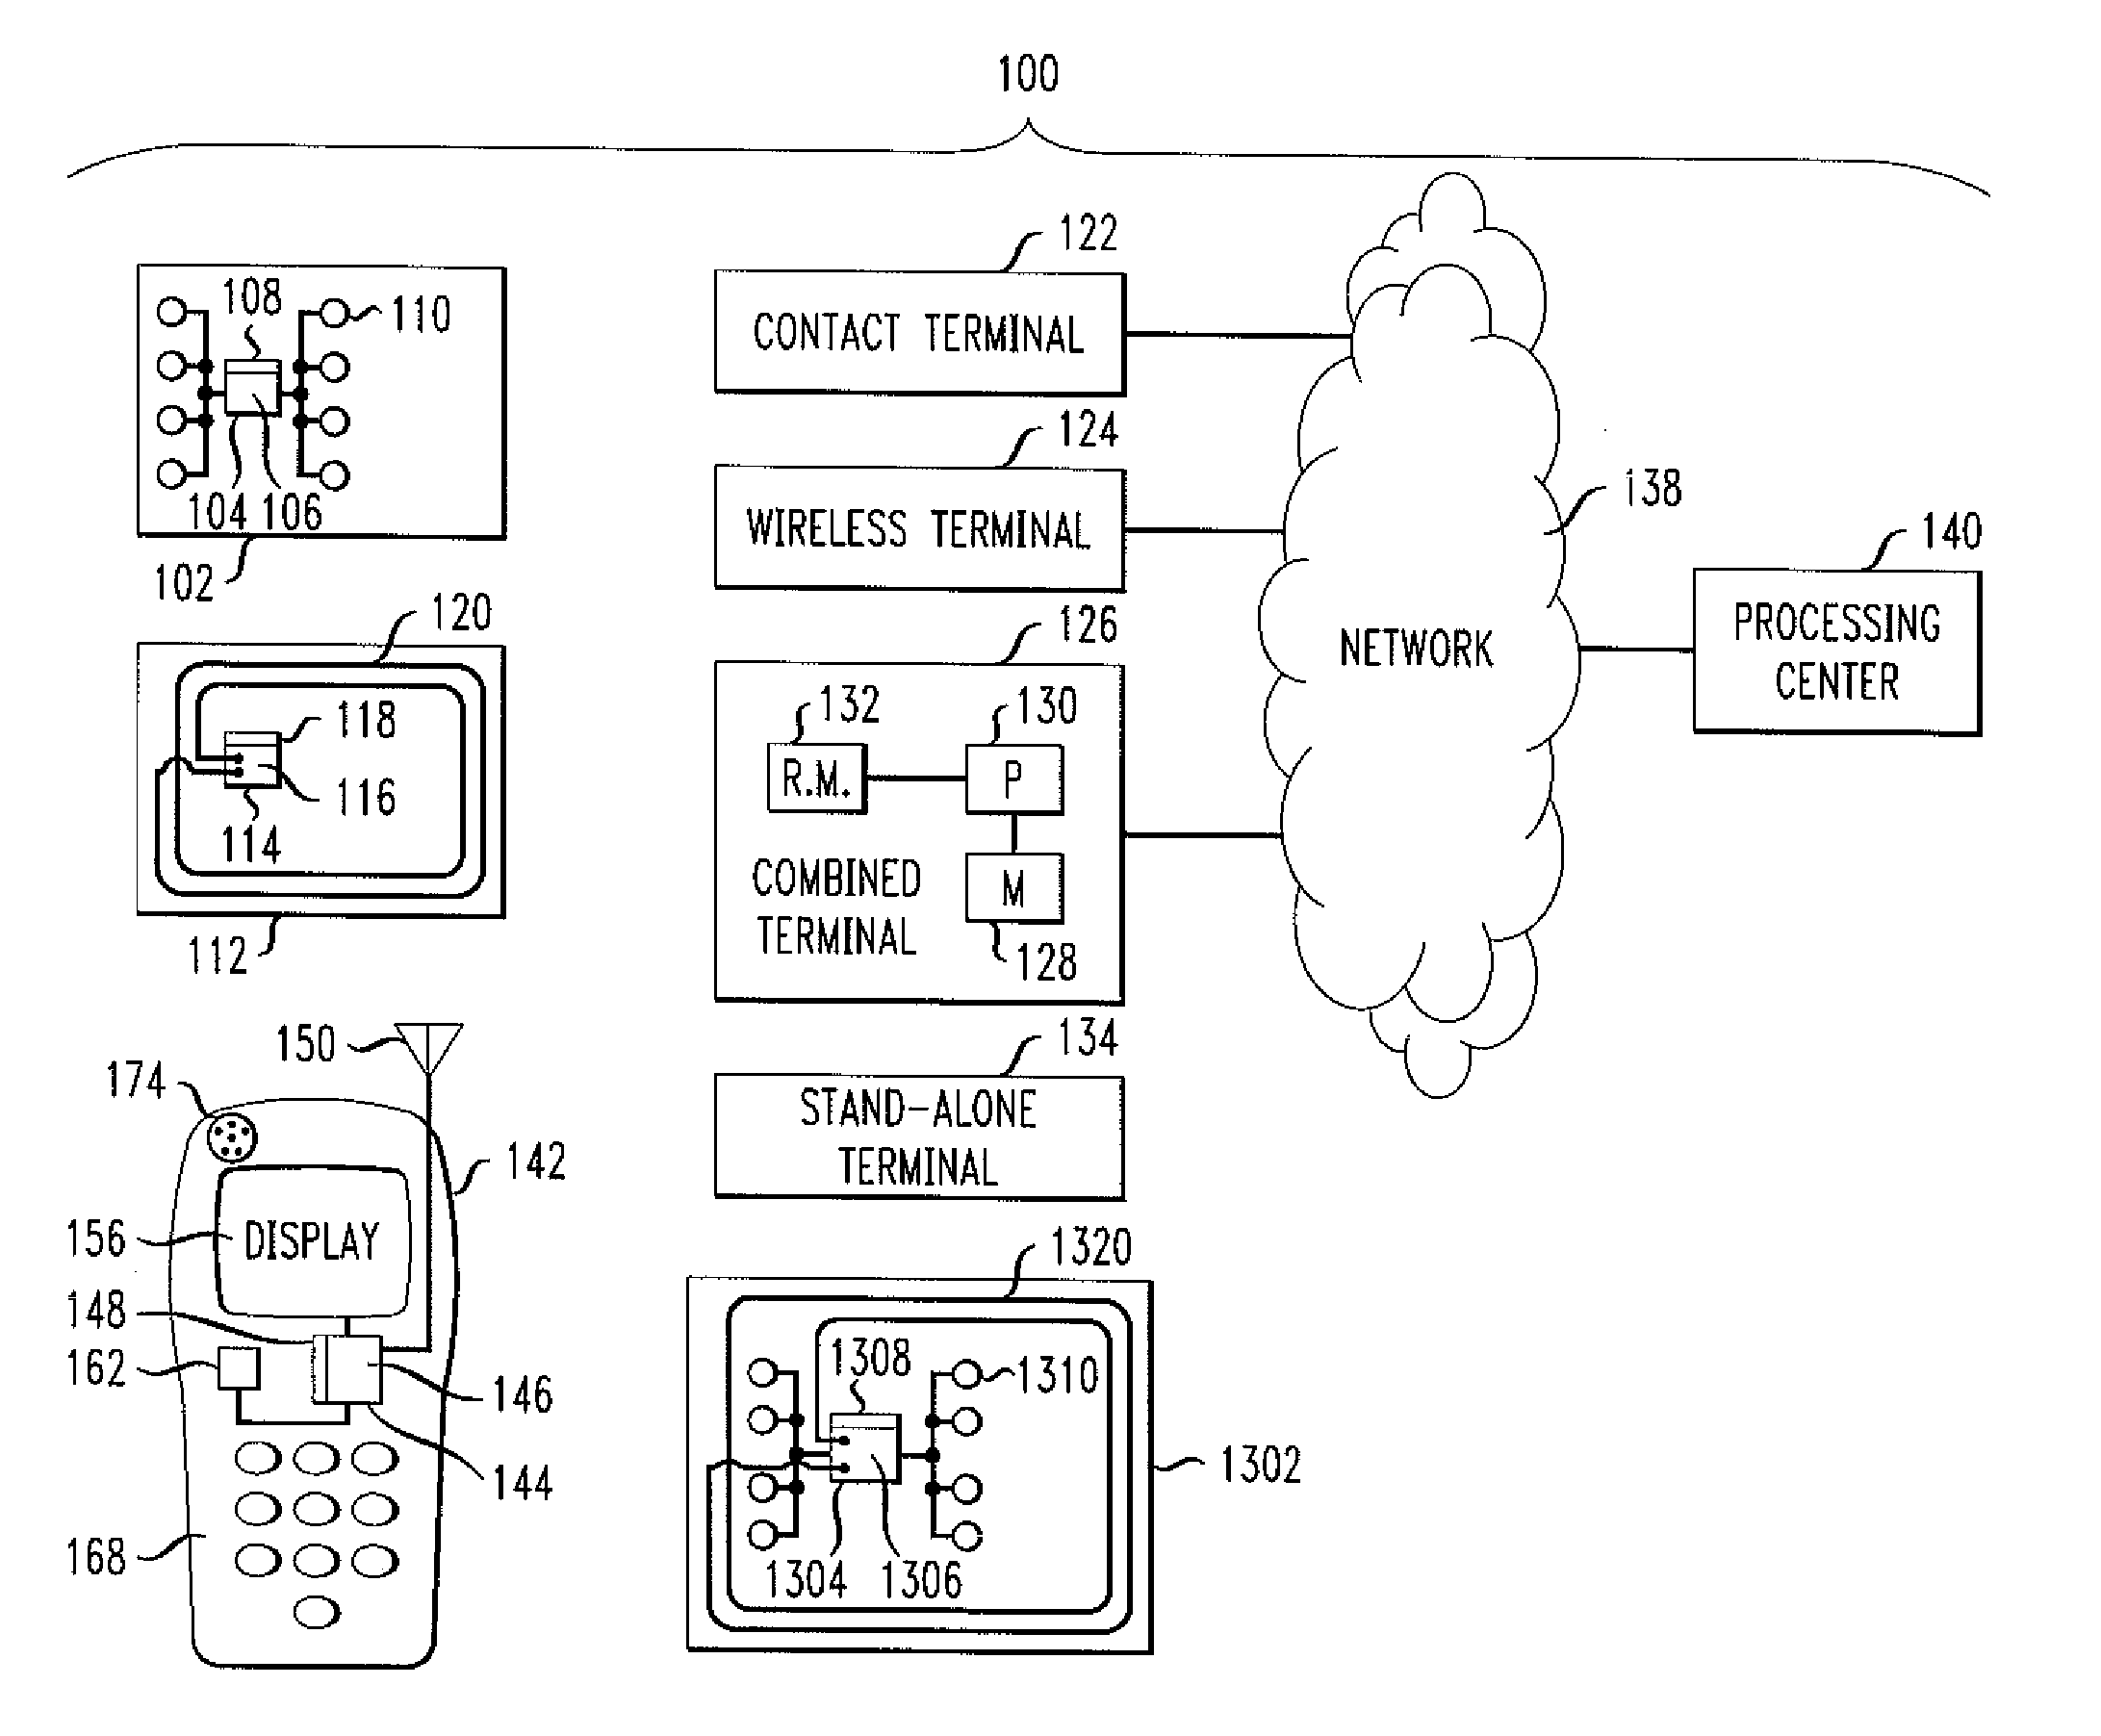 Techniques for co-existence of multiple stored value applications on a single payment device managing a shared balance